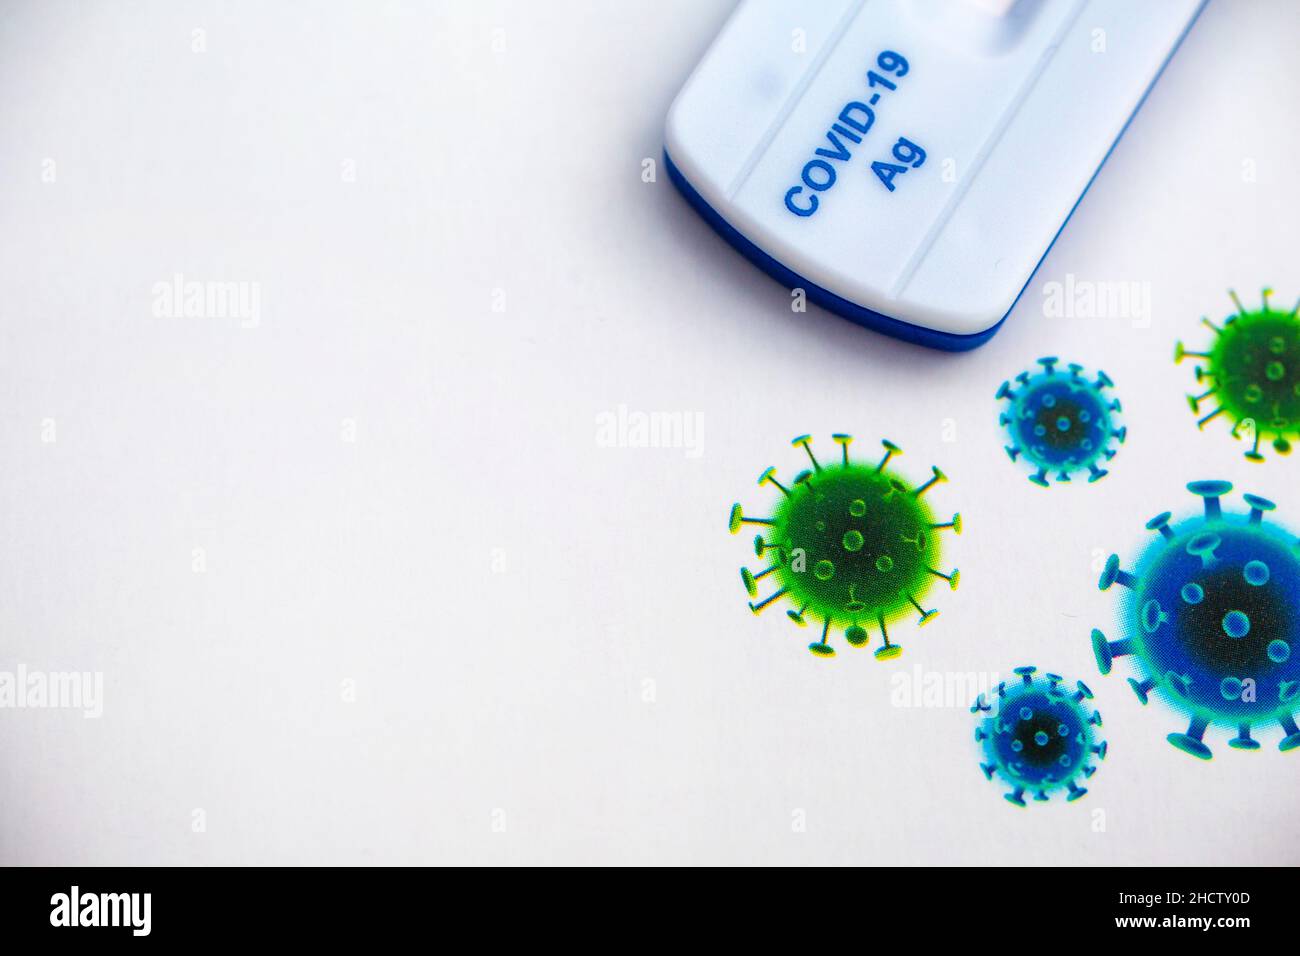 Quick testing for Covid-19 / SARS-CoV-2 infection concept: Models of a coronavirus with Covid-19 Rapid Antigen Self-Testing Stock Photo